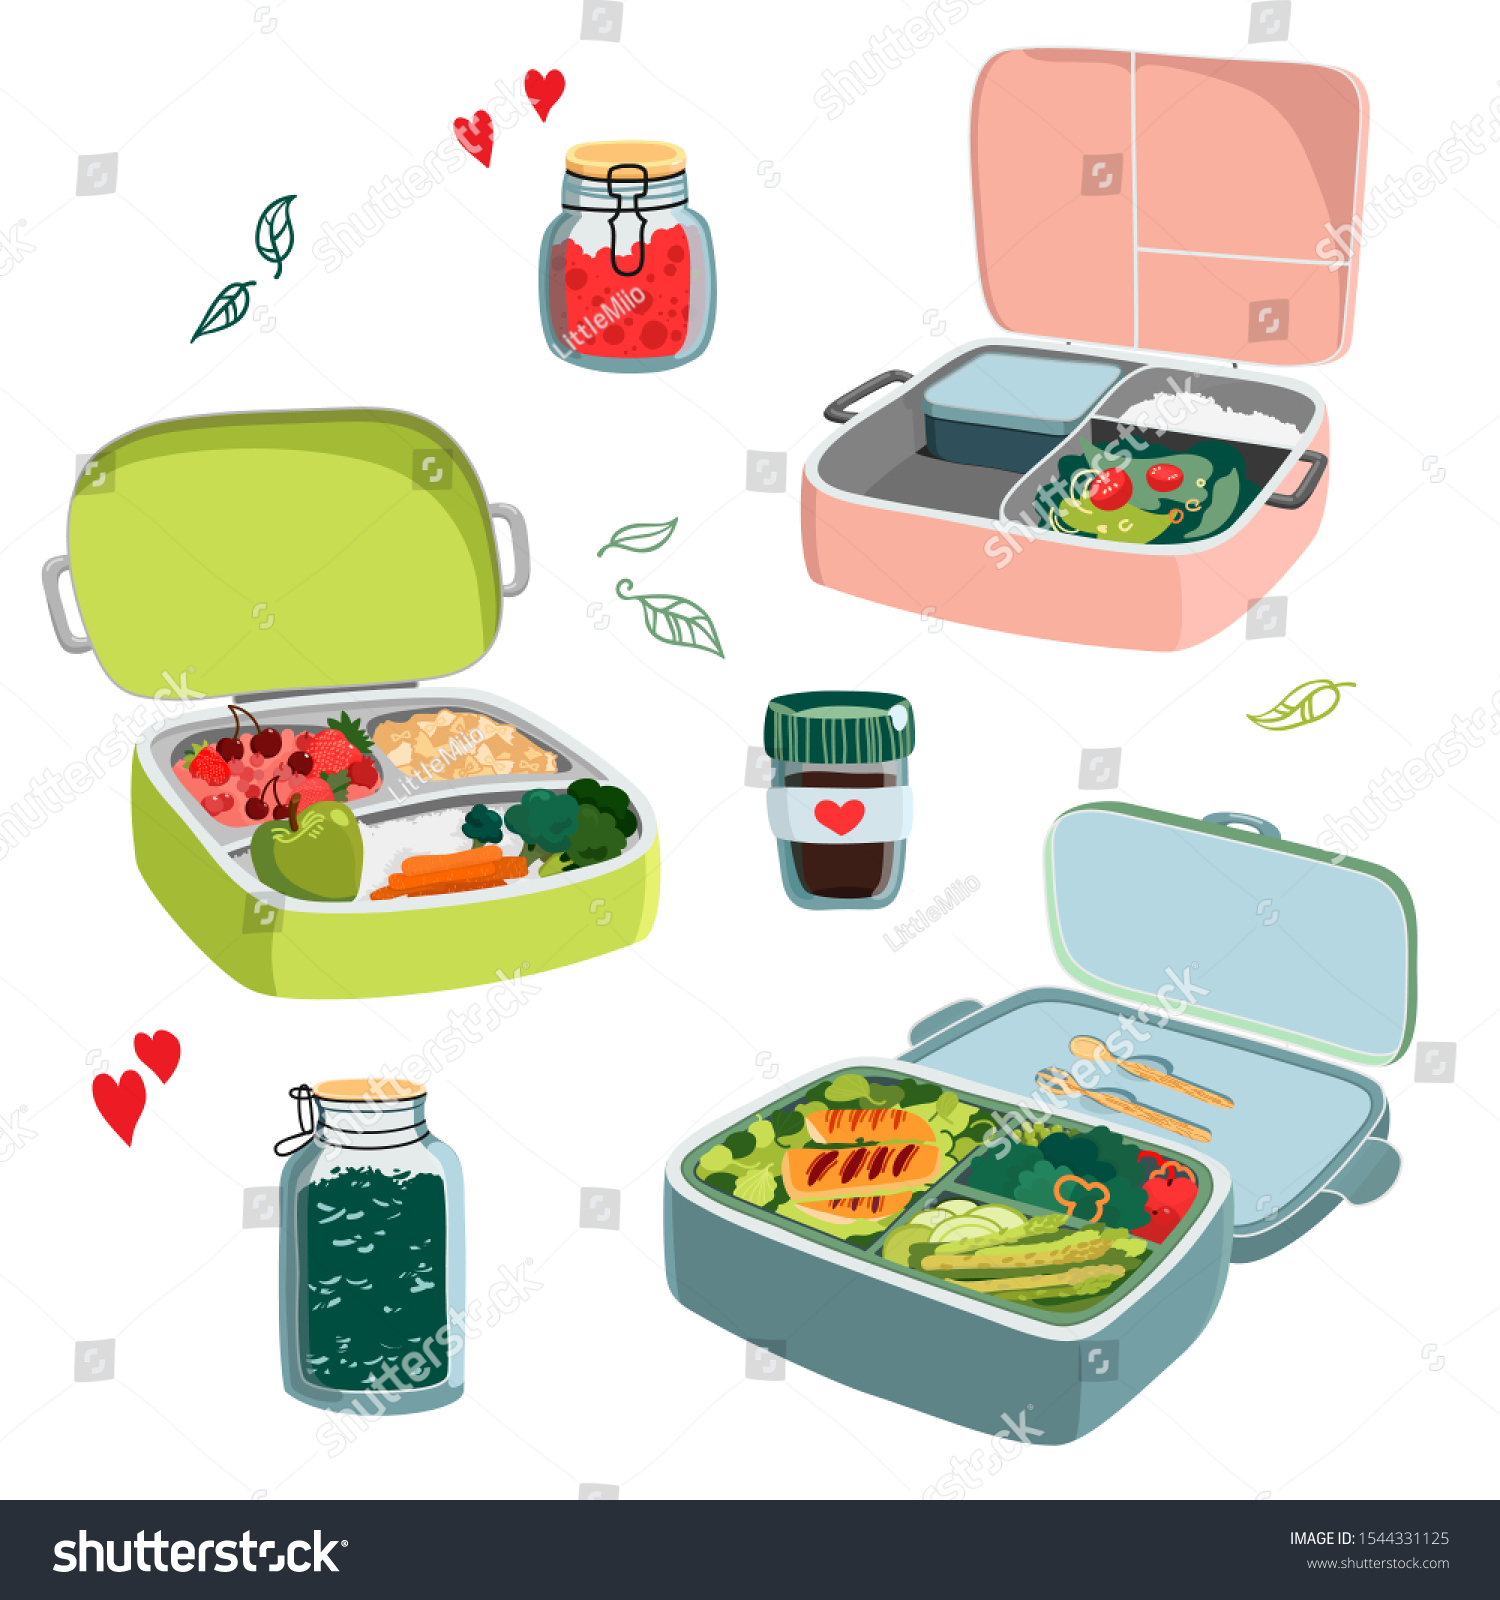 Zero waste concept set with different lunch boxes. Hand drawn vector illustration isolated on white background.